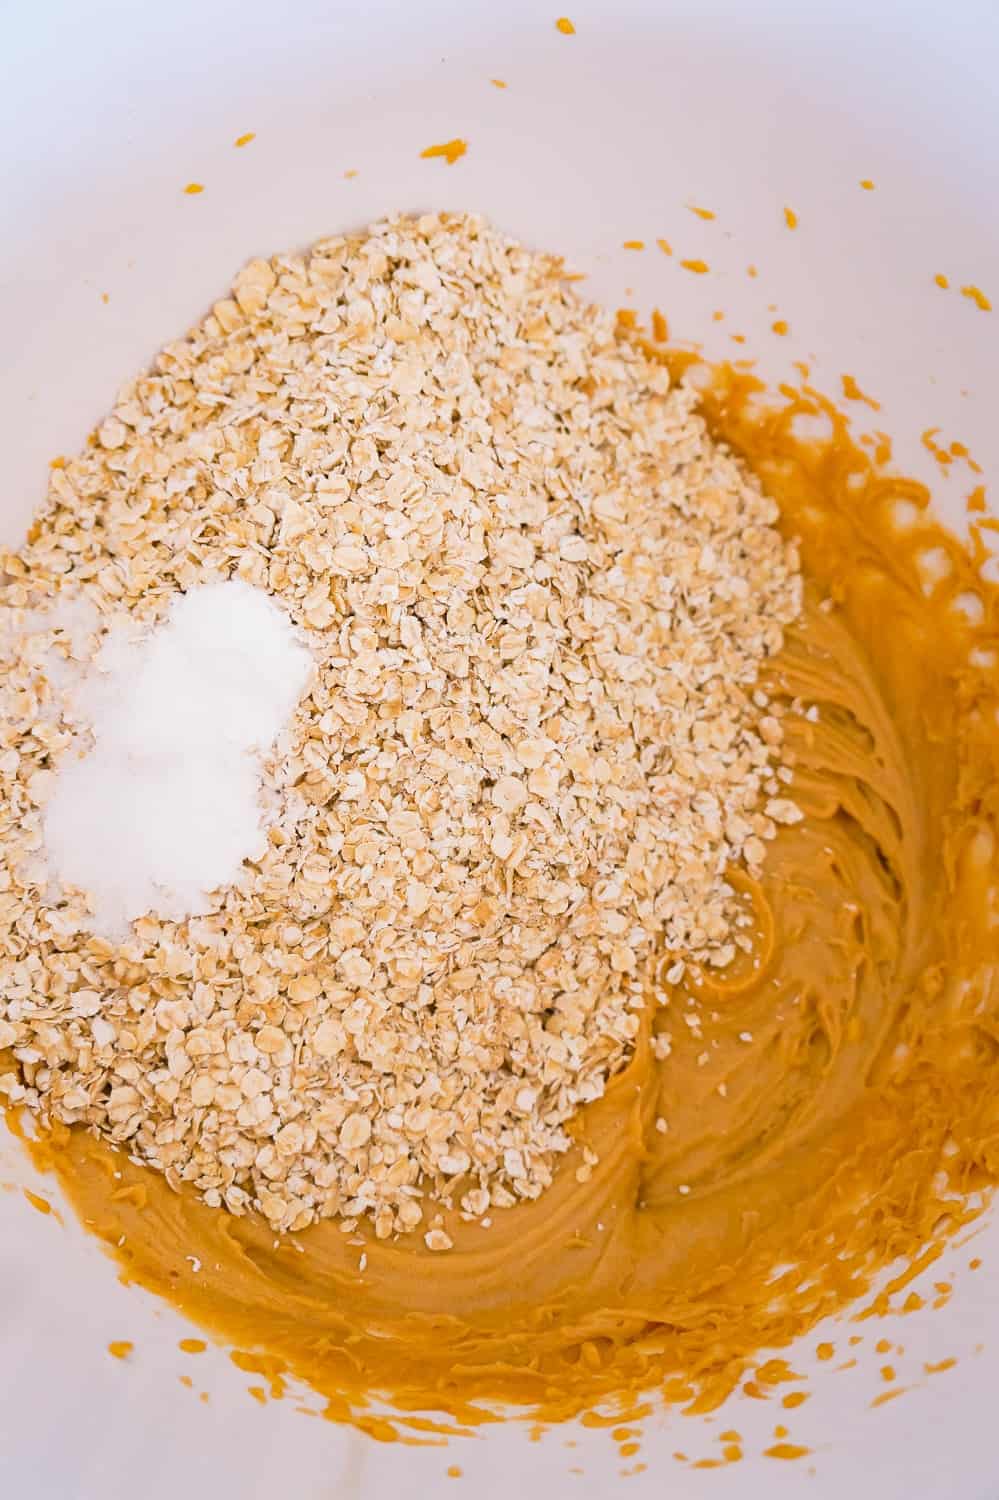 baking powder and quick oats added to peanut butter mixture in a mixing bowl